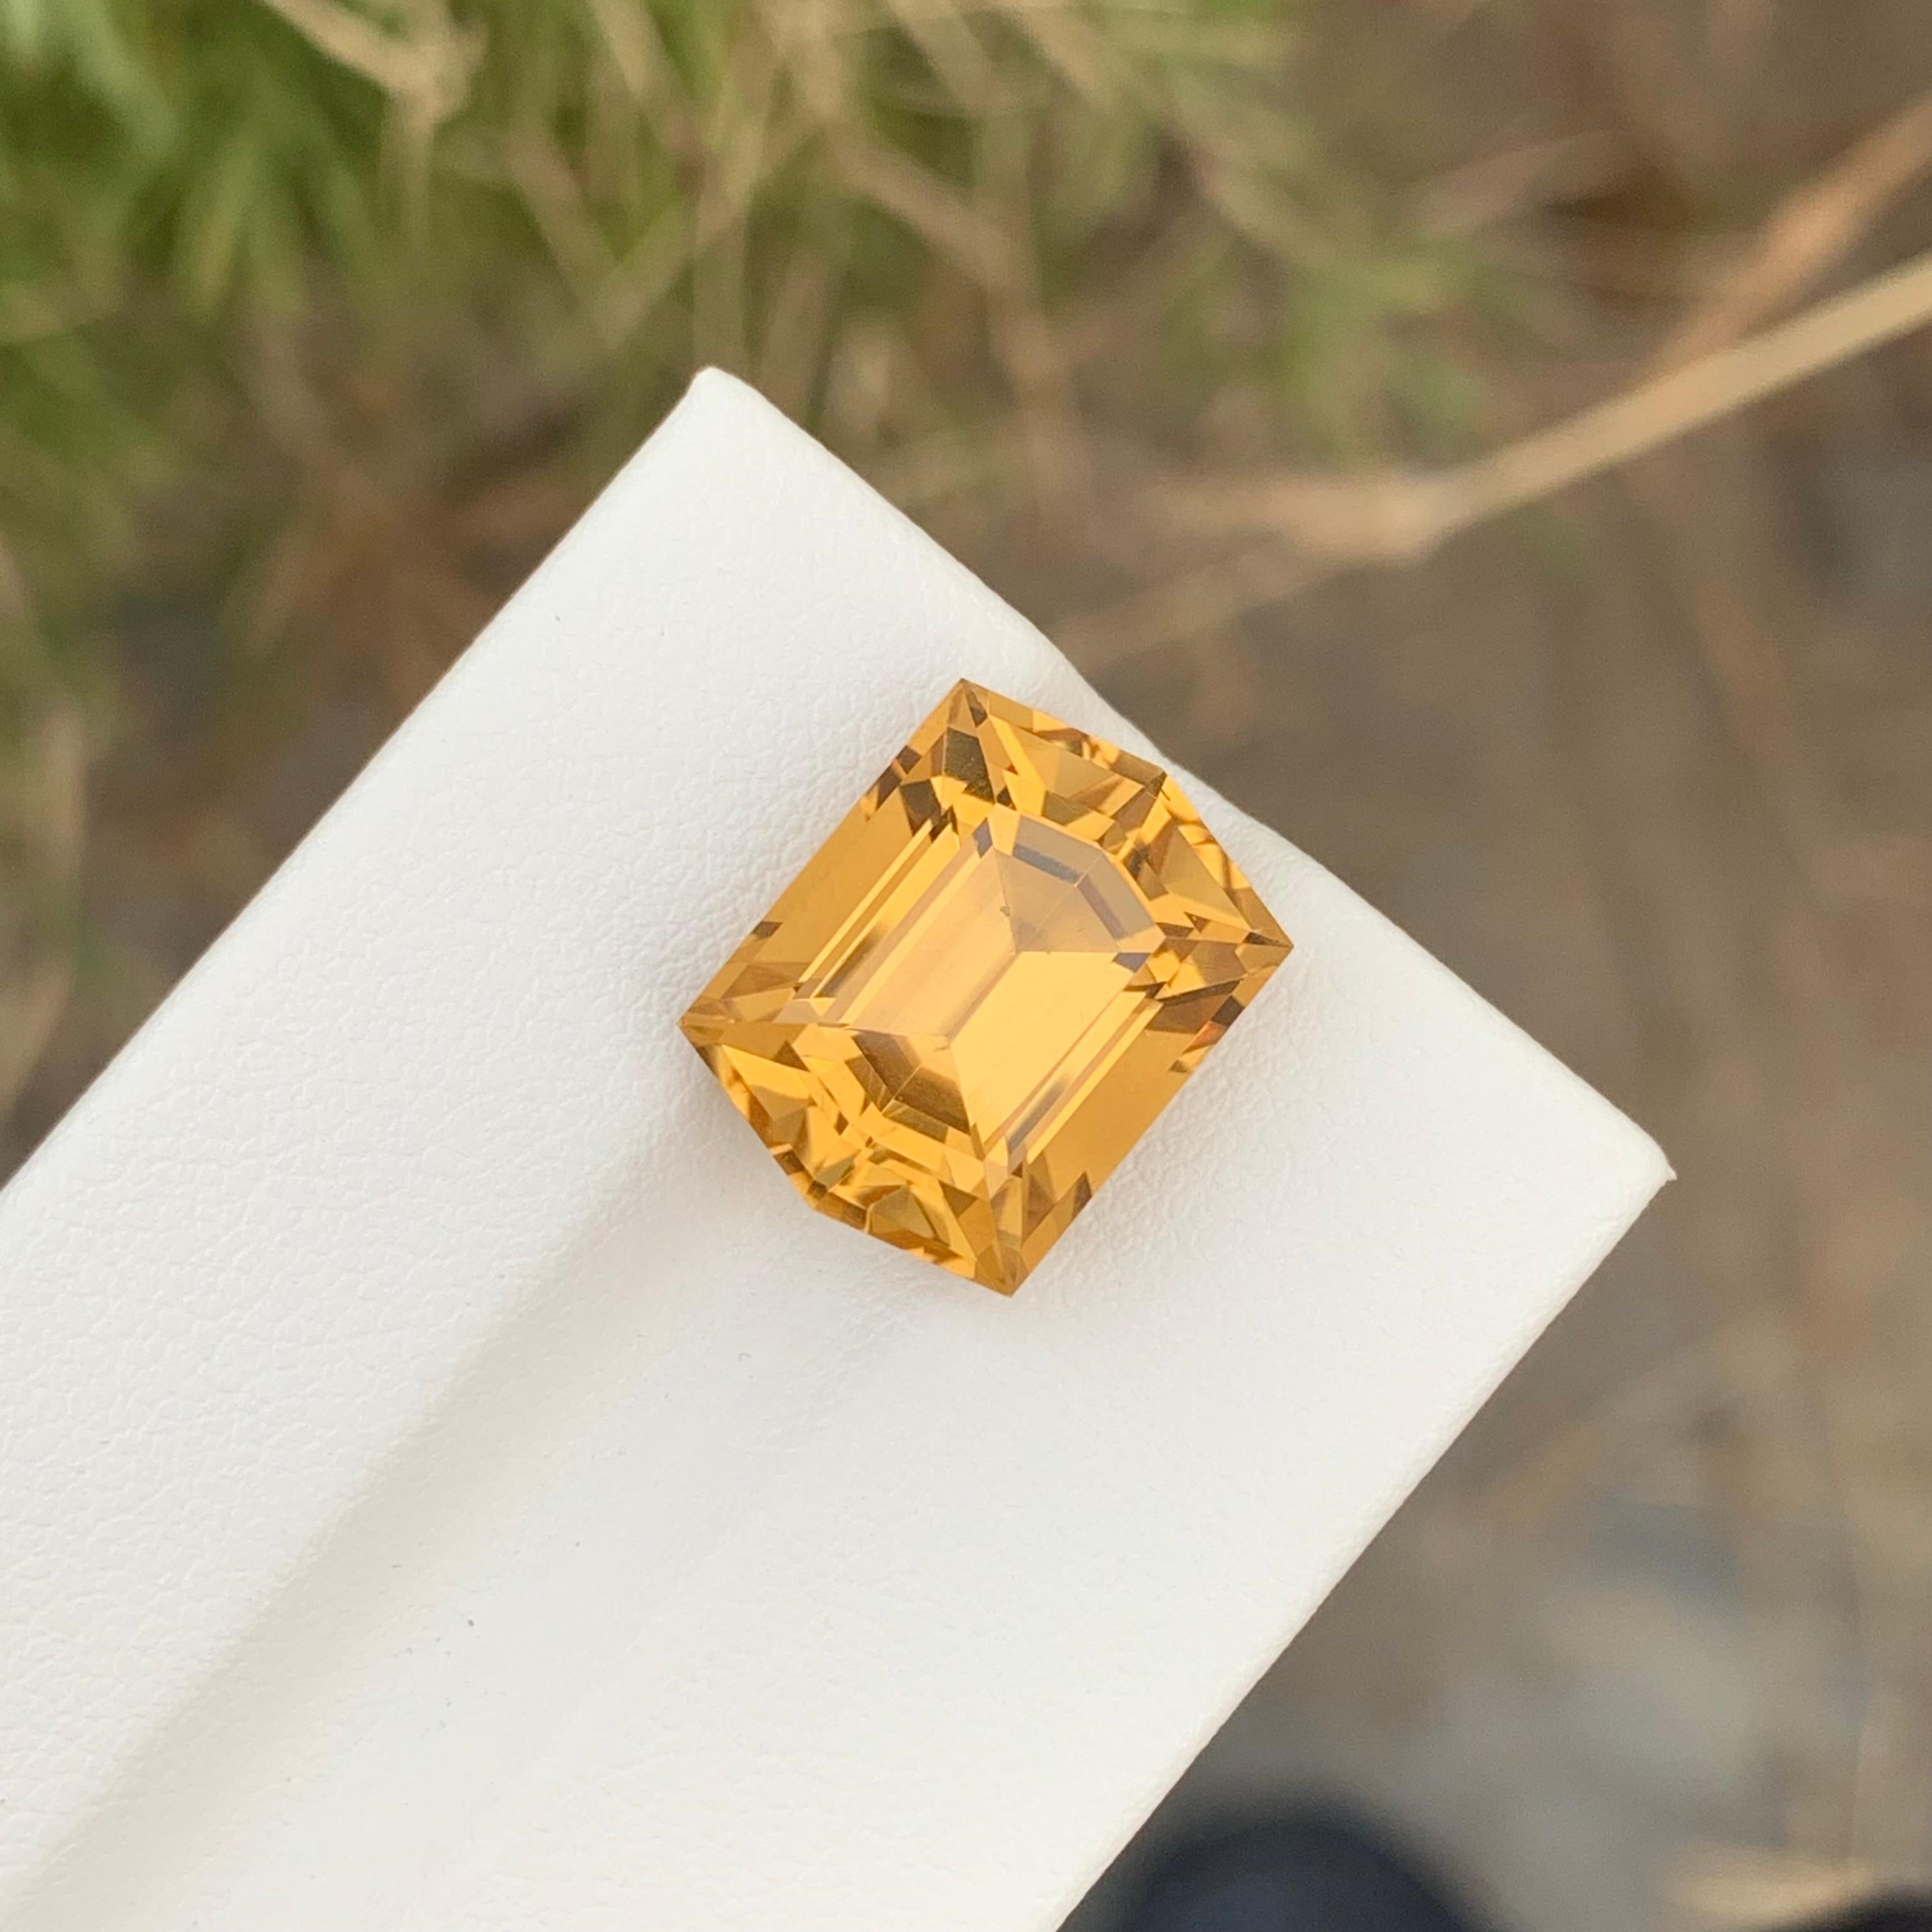 Loose Citrine
Weight: 9.95 Carats
Dimension: 14.7 x 11.3 x 9.2 Mm
Origin: Brazil
Colour: Honey Brown
Treatment: Non
Certficate: On Demand
Cut: Hexagon 


Citrine, a radiant and versatile gemstone, enchants with its warm, golden hues and remarkable